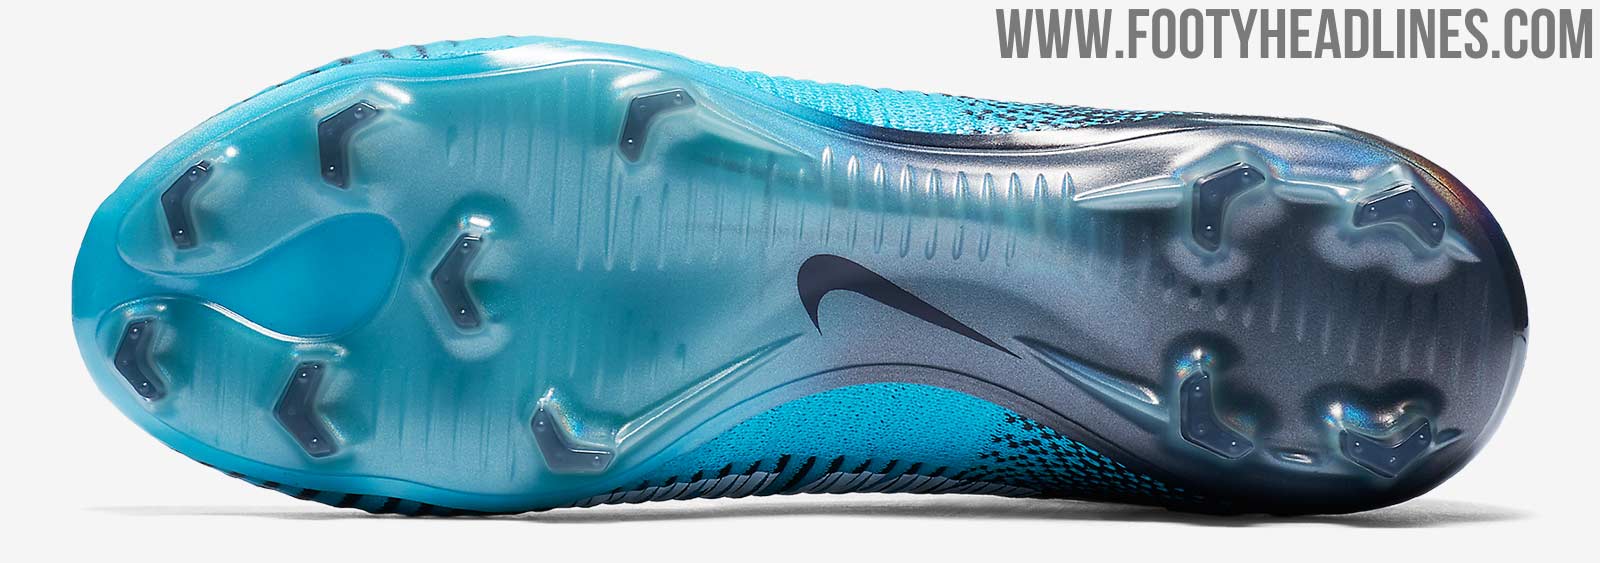 Nike Mercurial Superfly 6 Elite CR7 FG Chapter 6